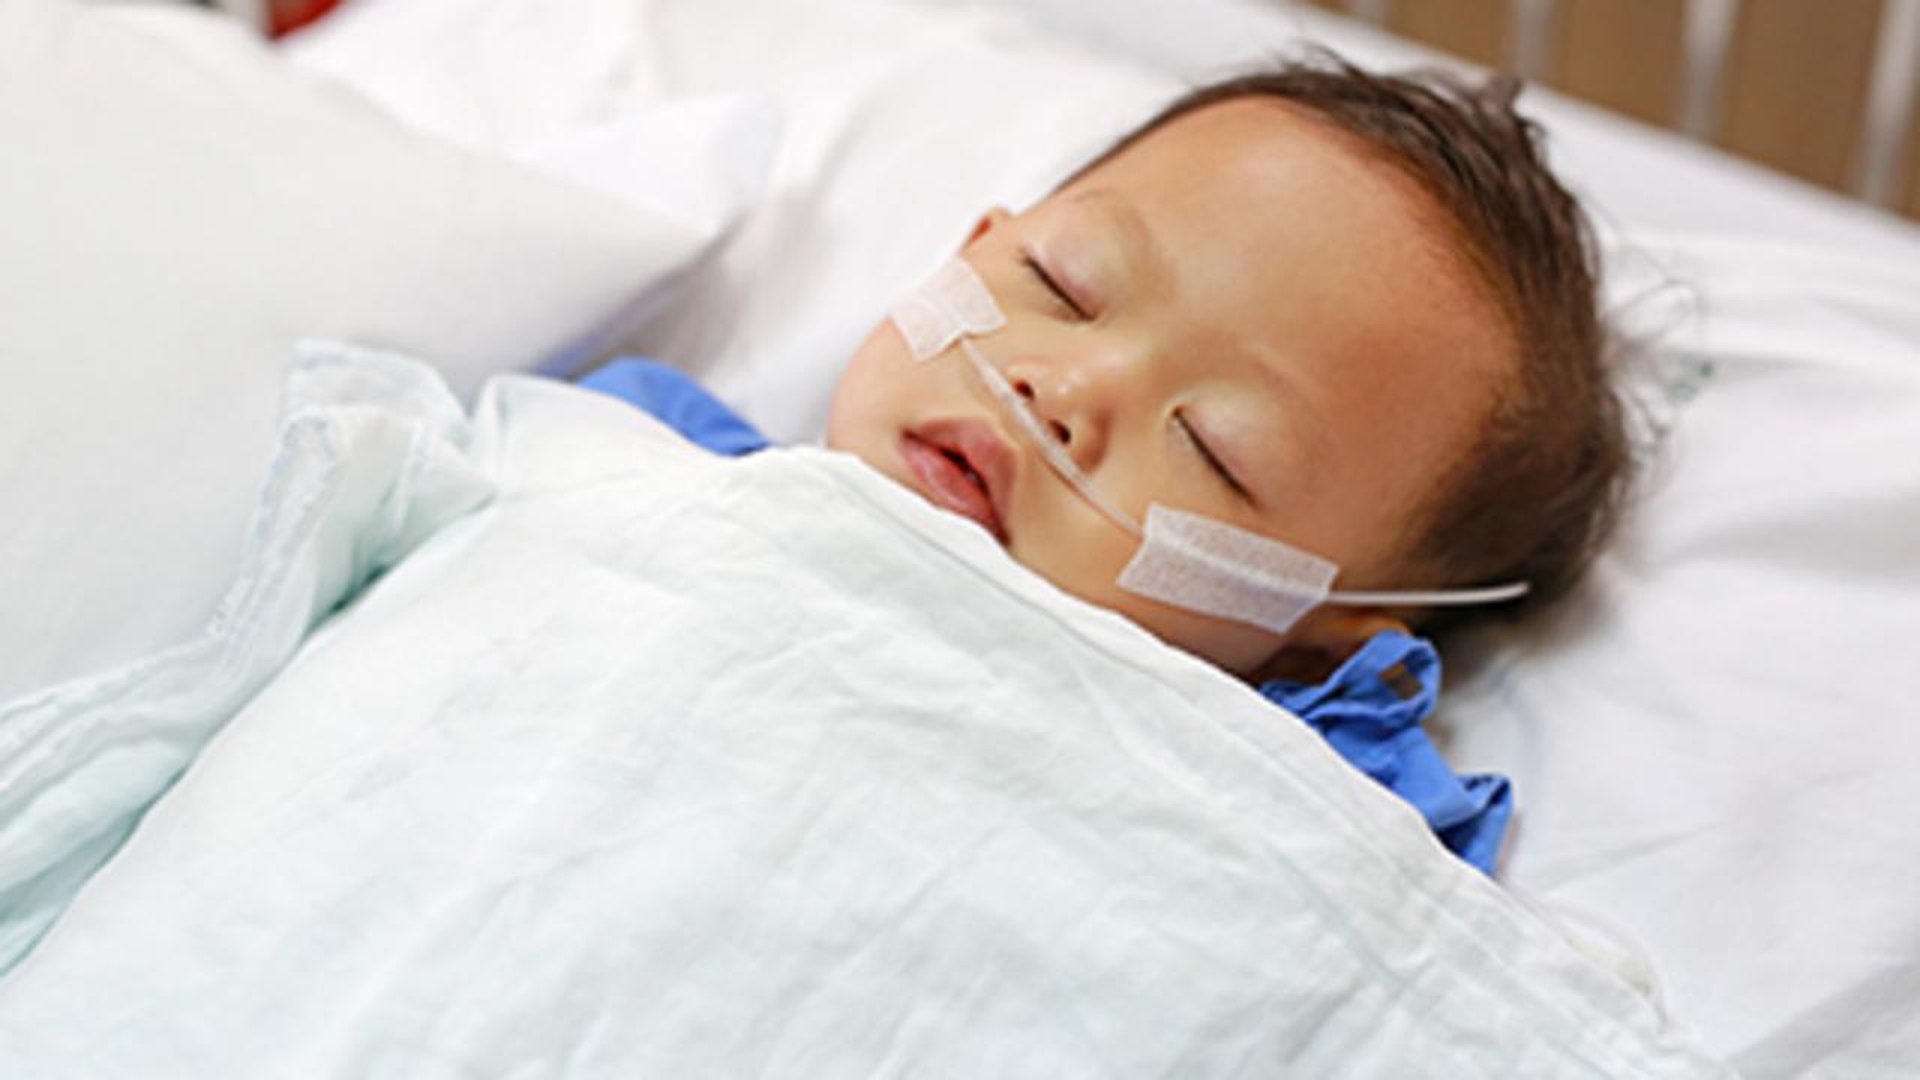 News Picture: Does Your Child Have a Cold or Severe RSV? Signs to Look For